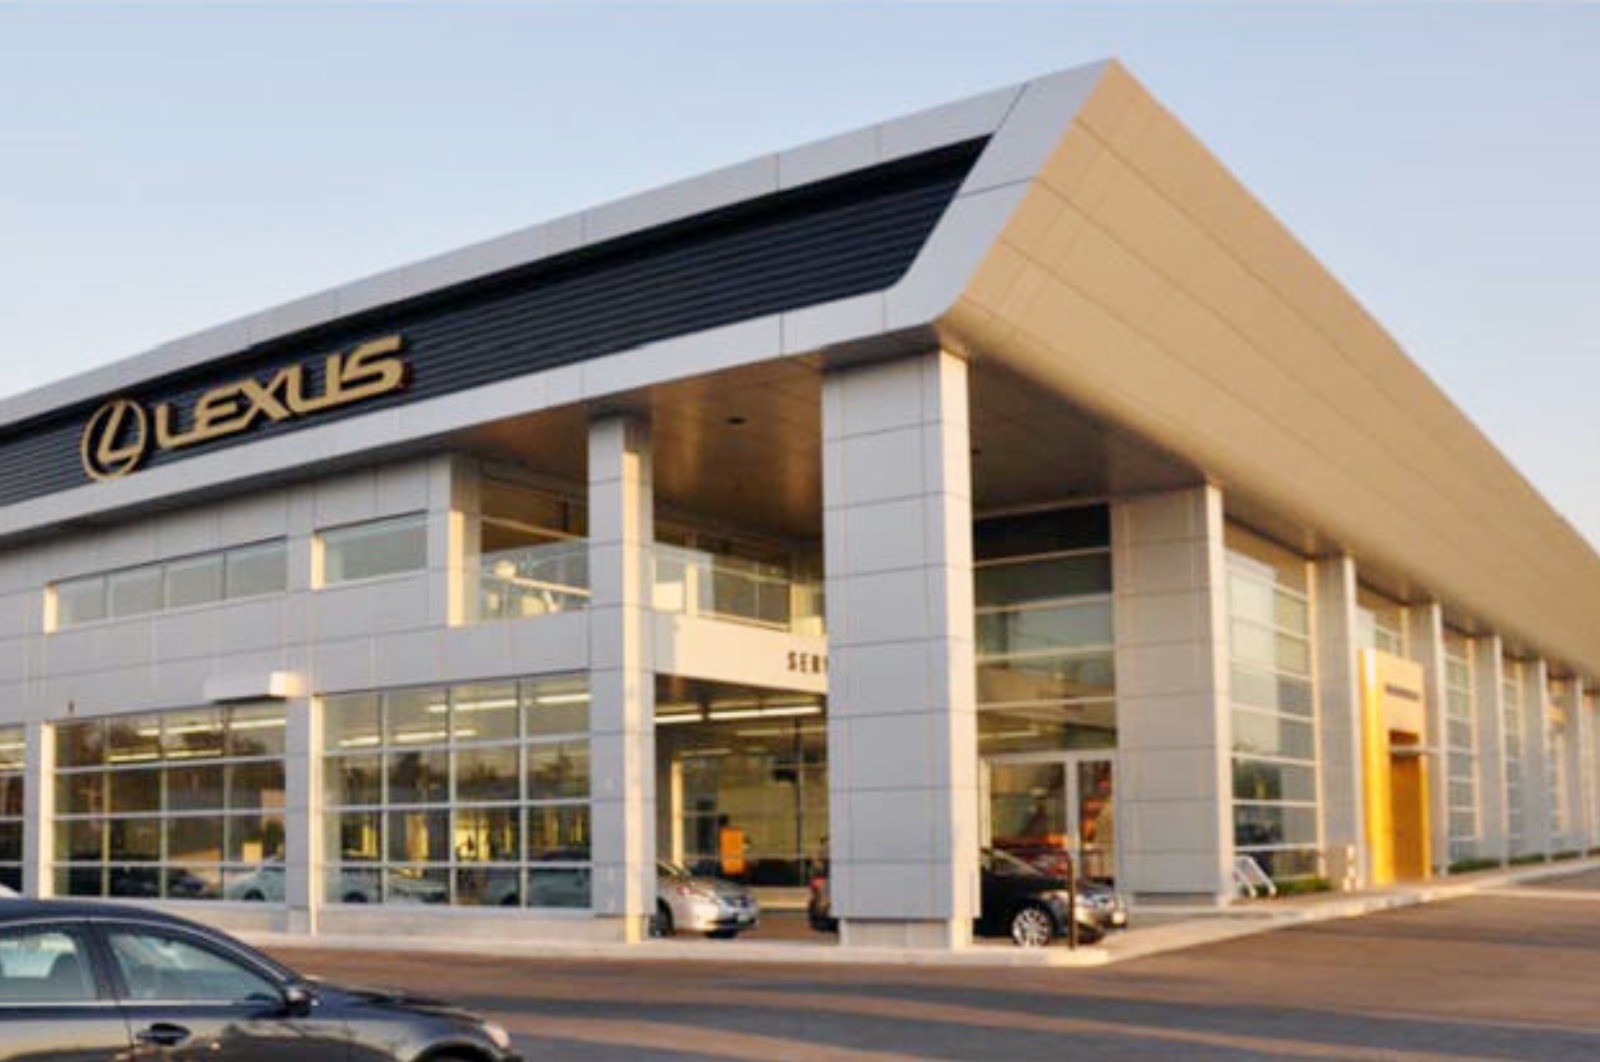 Robertson-Walls-Ceilings-Completed-Projects-Luxury-Car-Dealerships-Open-Road-Lexus Completed Projects